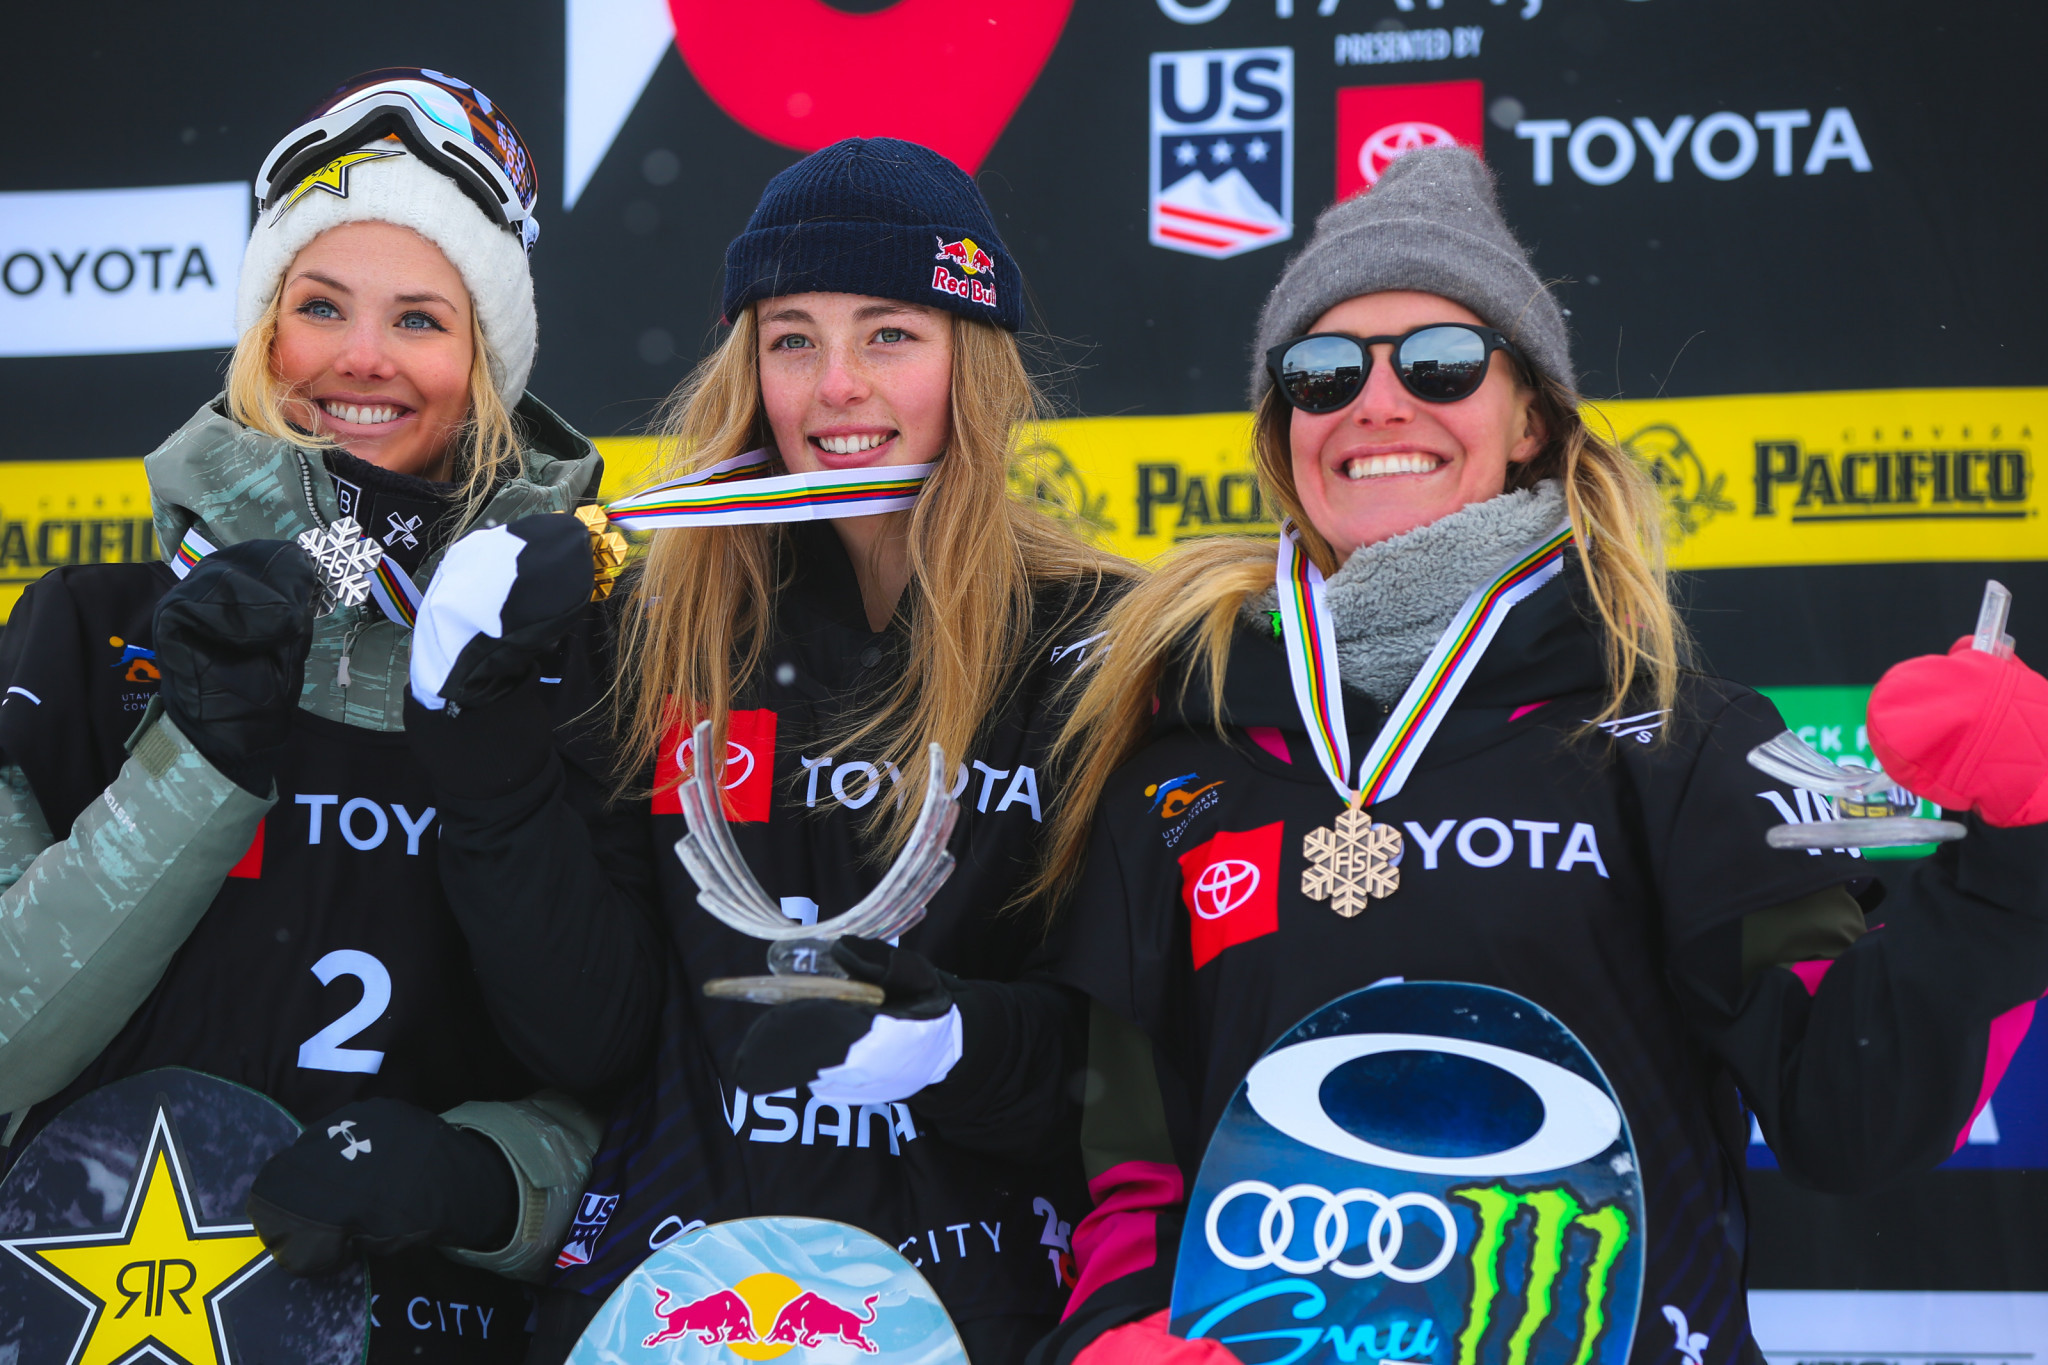 Top qualifiers crowned slopestyle winners as finals cancelled on last day of FIS Freestyle Ski and Snowboard World Championships